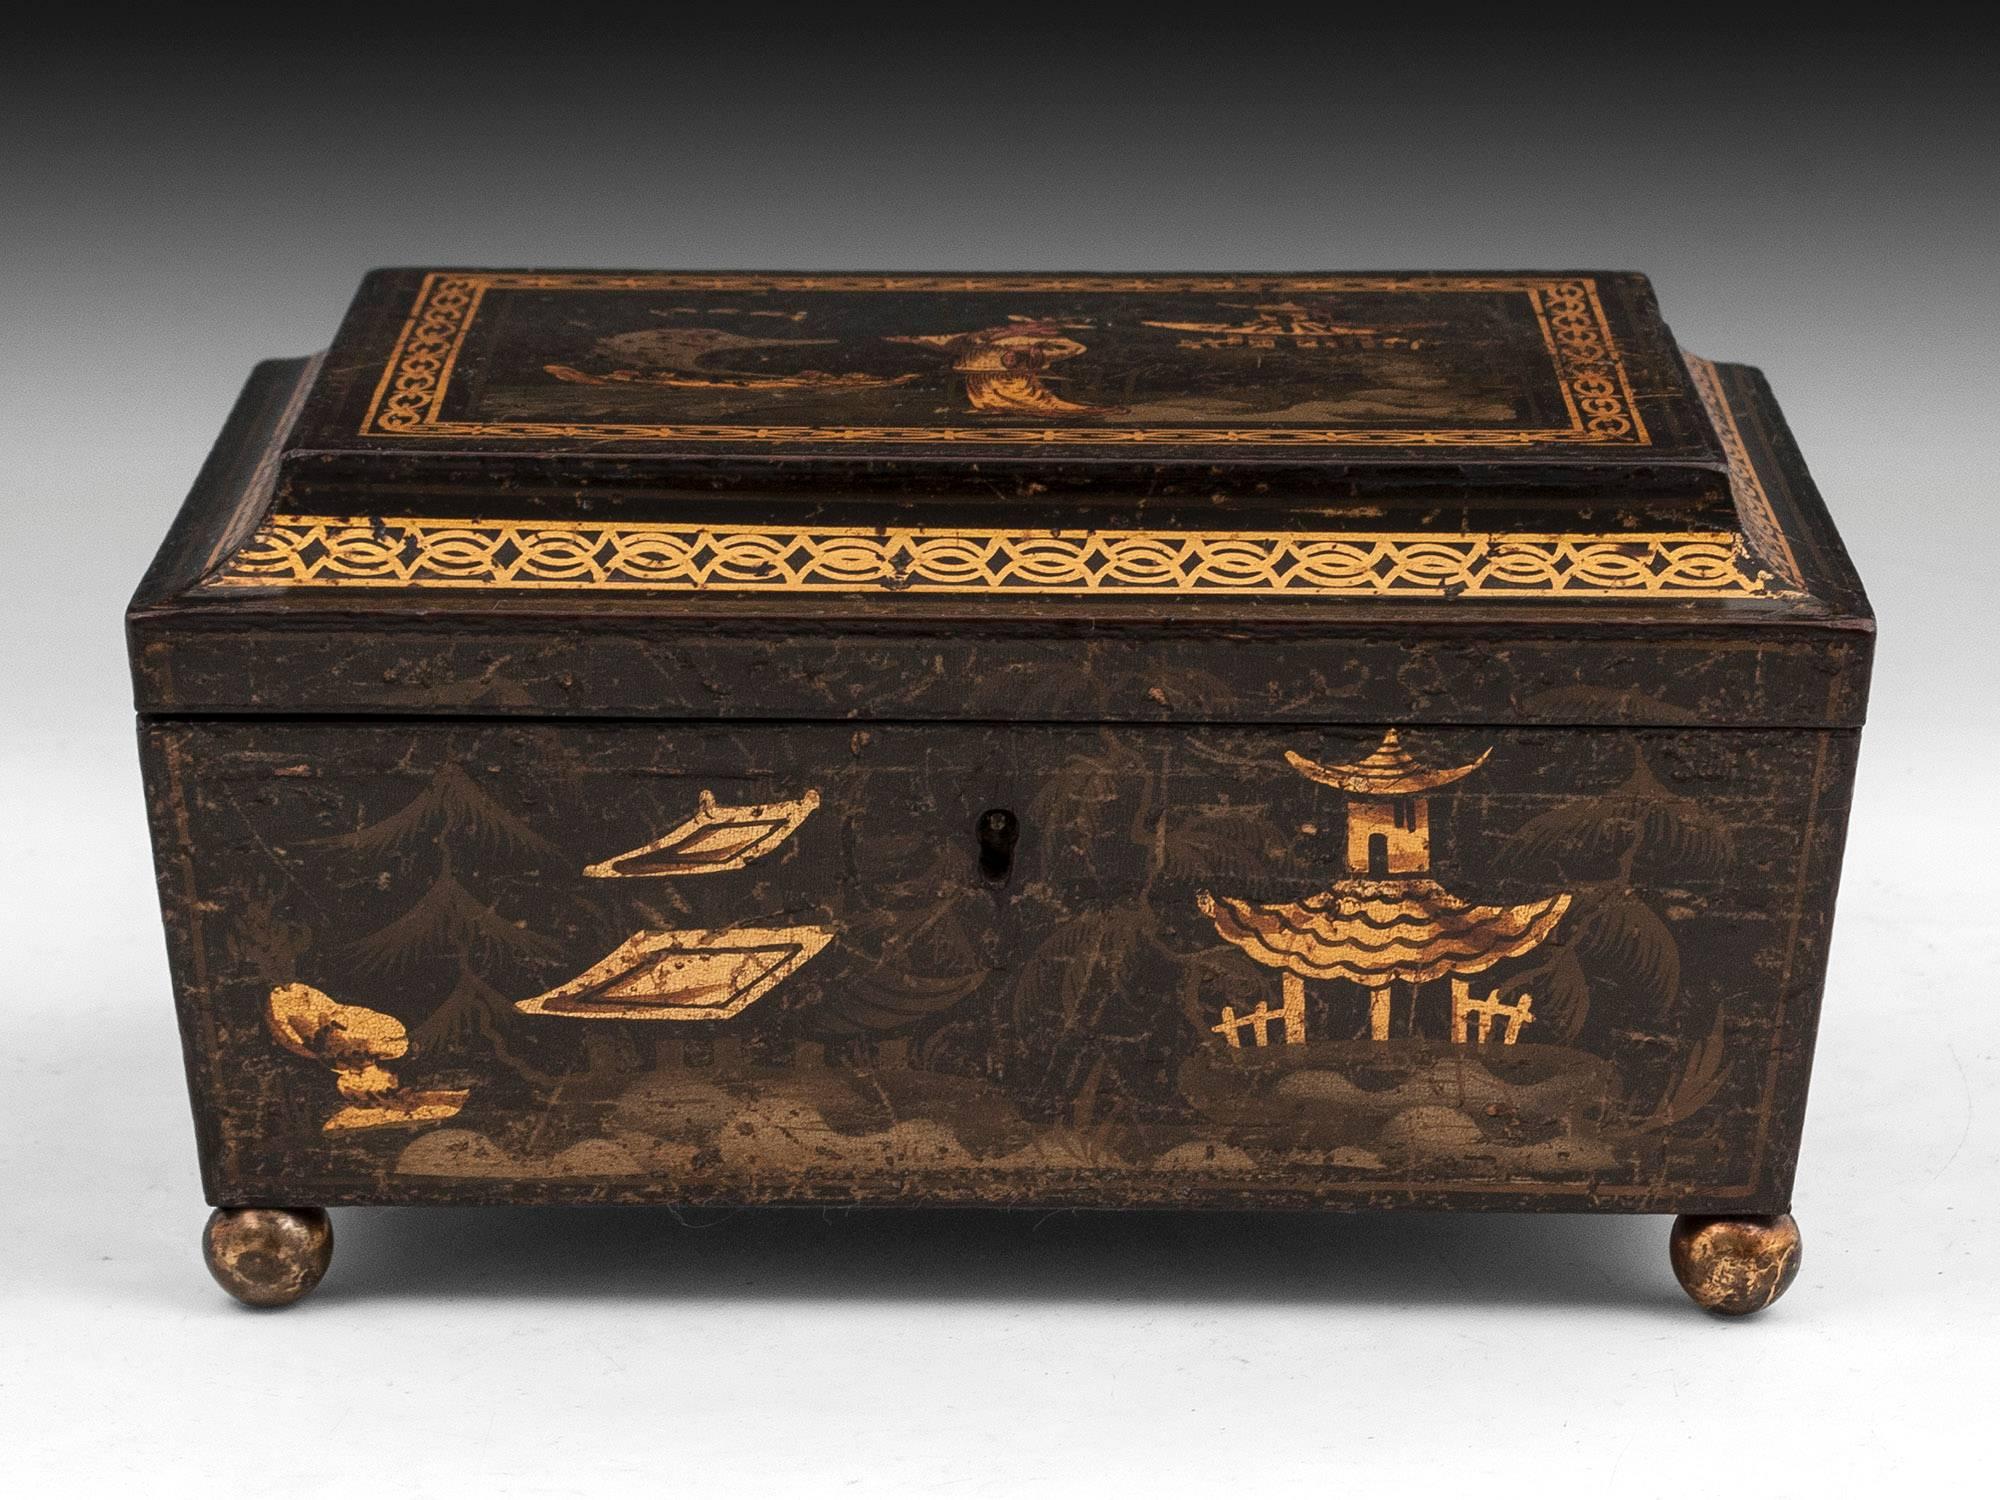 The sewing box has naive decorations of landscape scenes and a figure on the top.